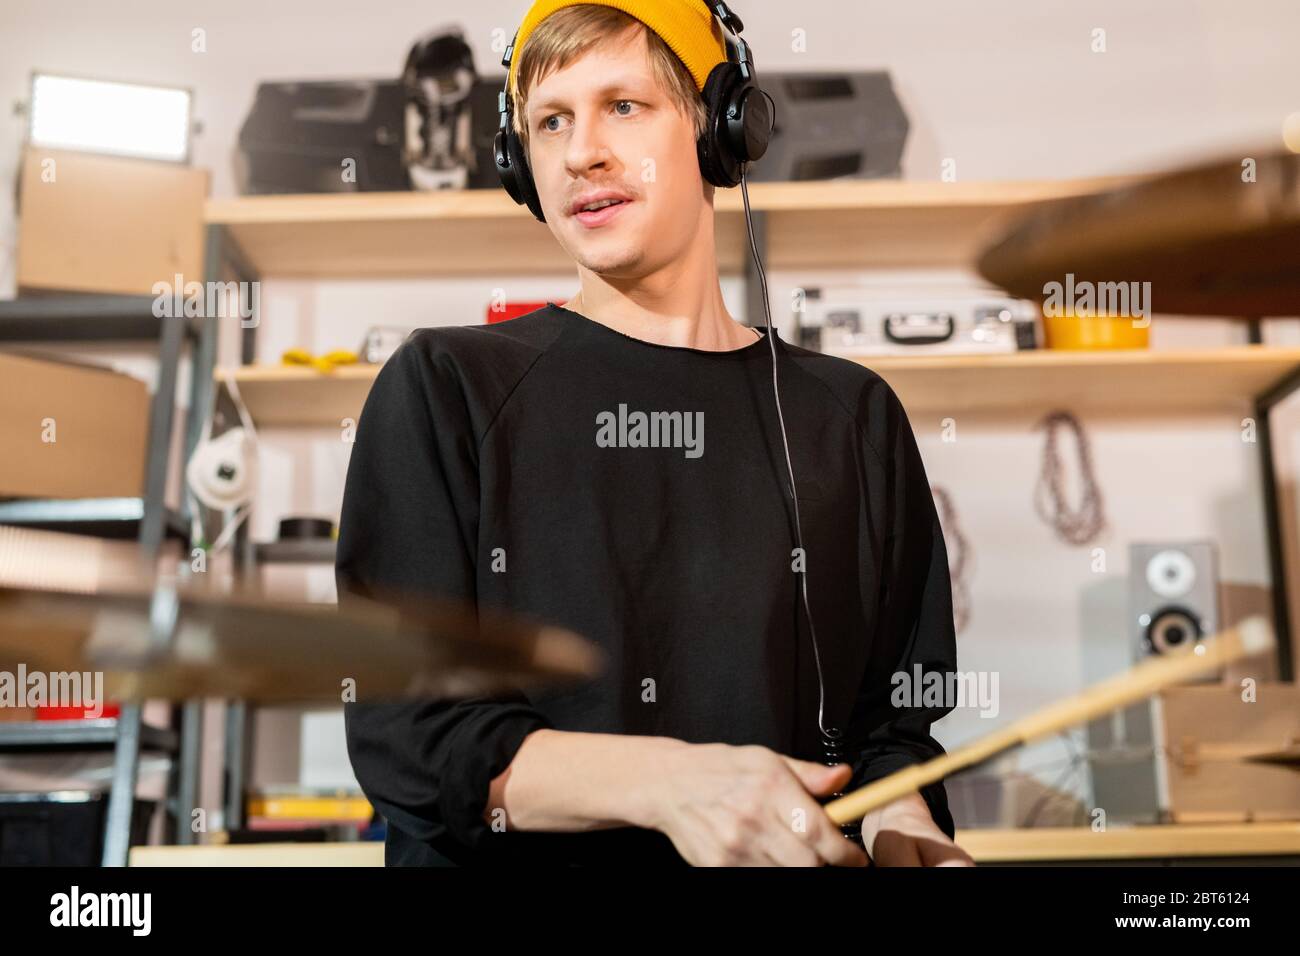 Contemporary young blond male drummer in headphones, yellow beanie and black sweatshirt hitting cymbals and drum in garage Stock Photo